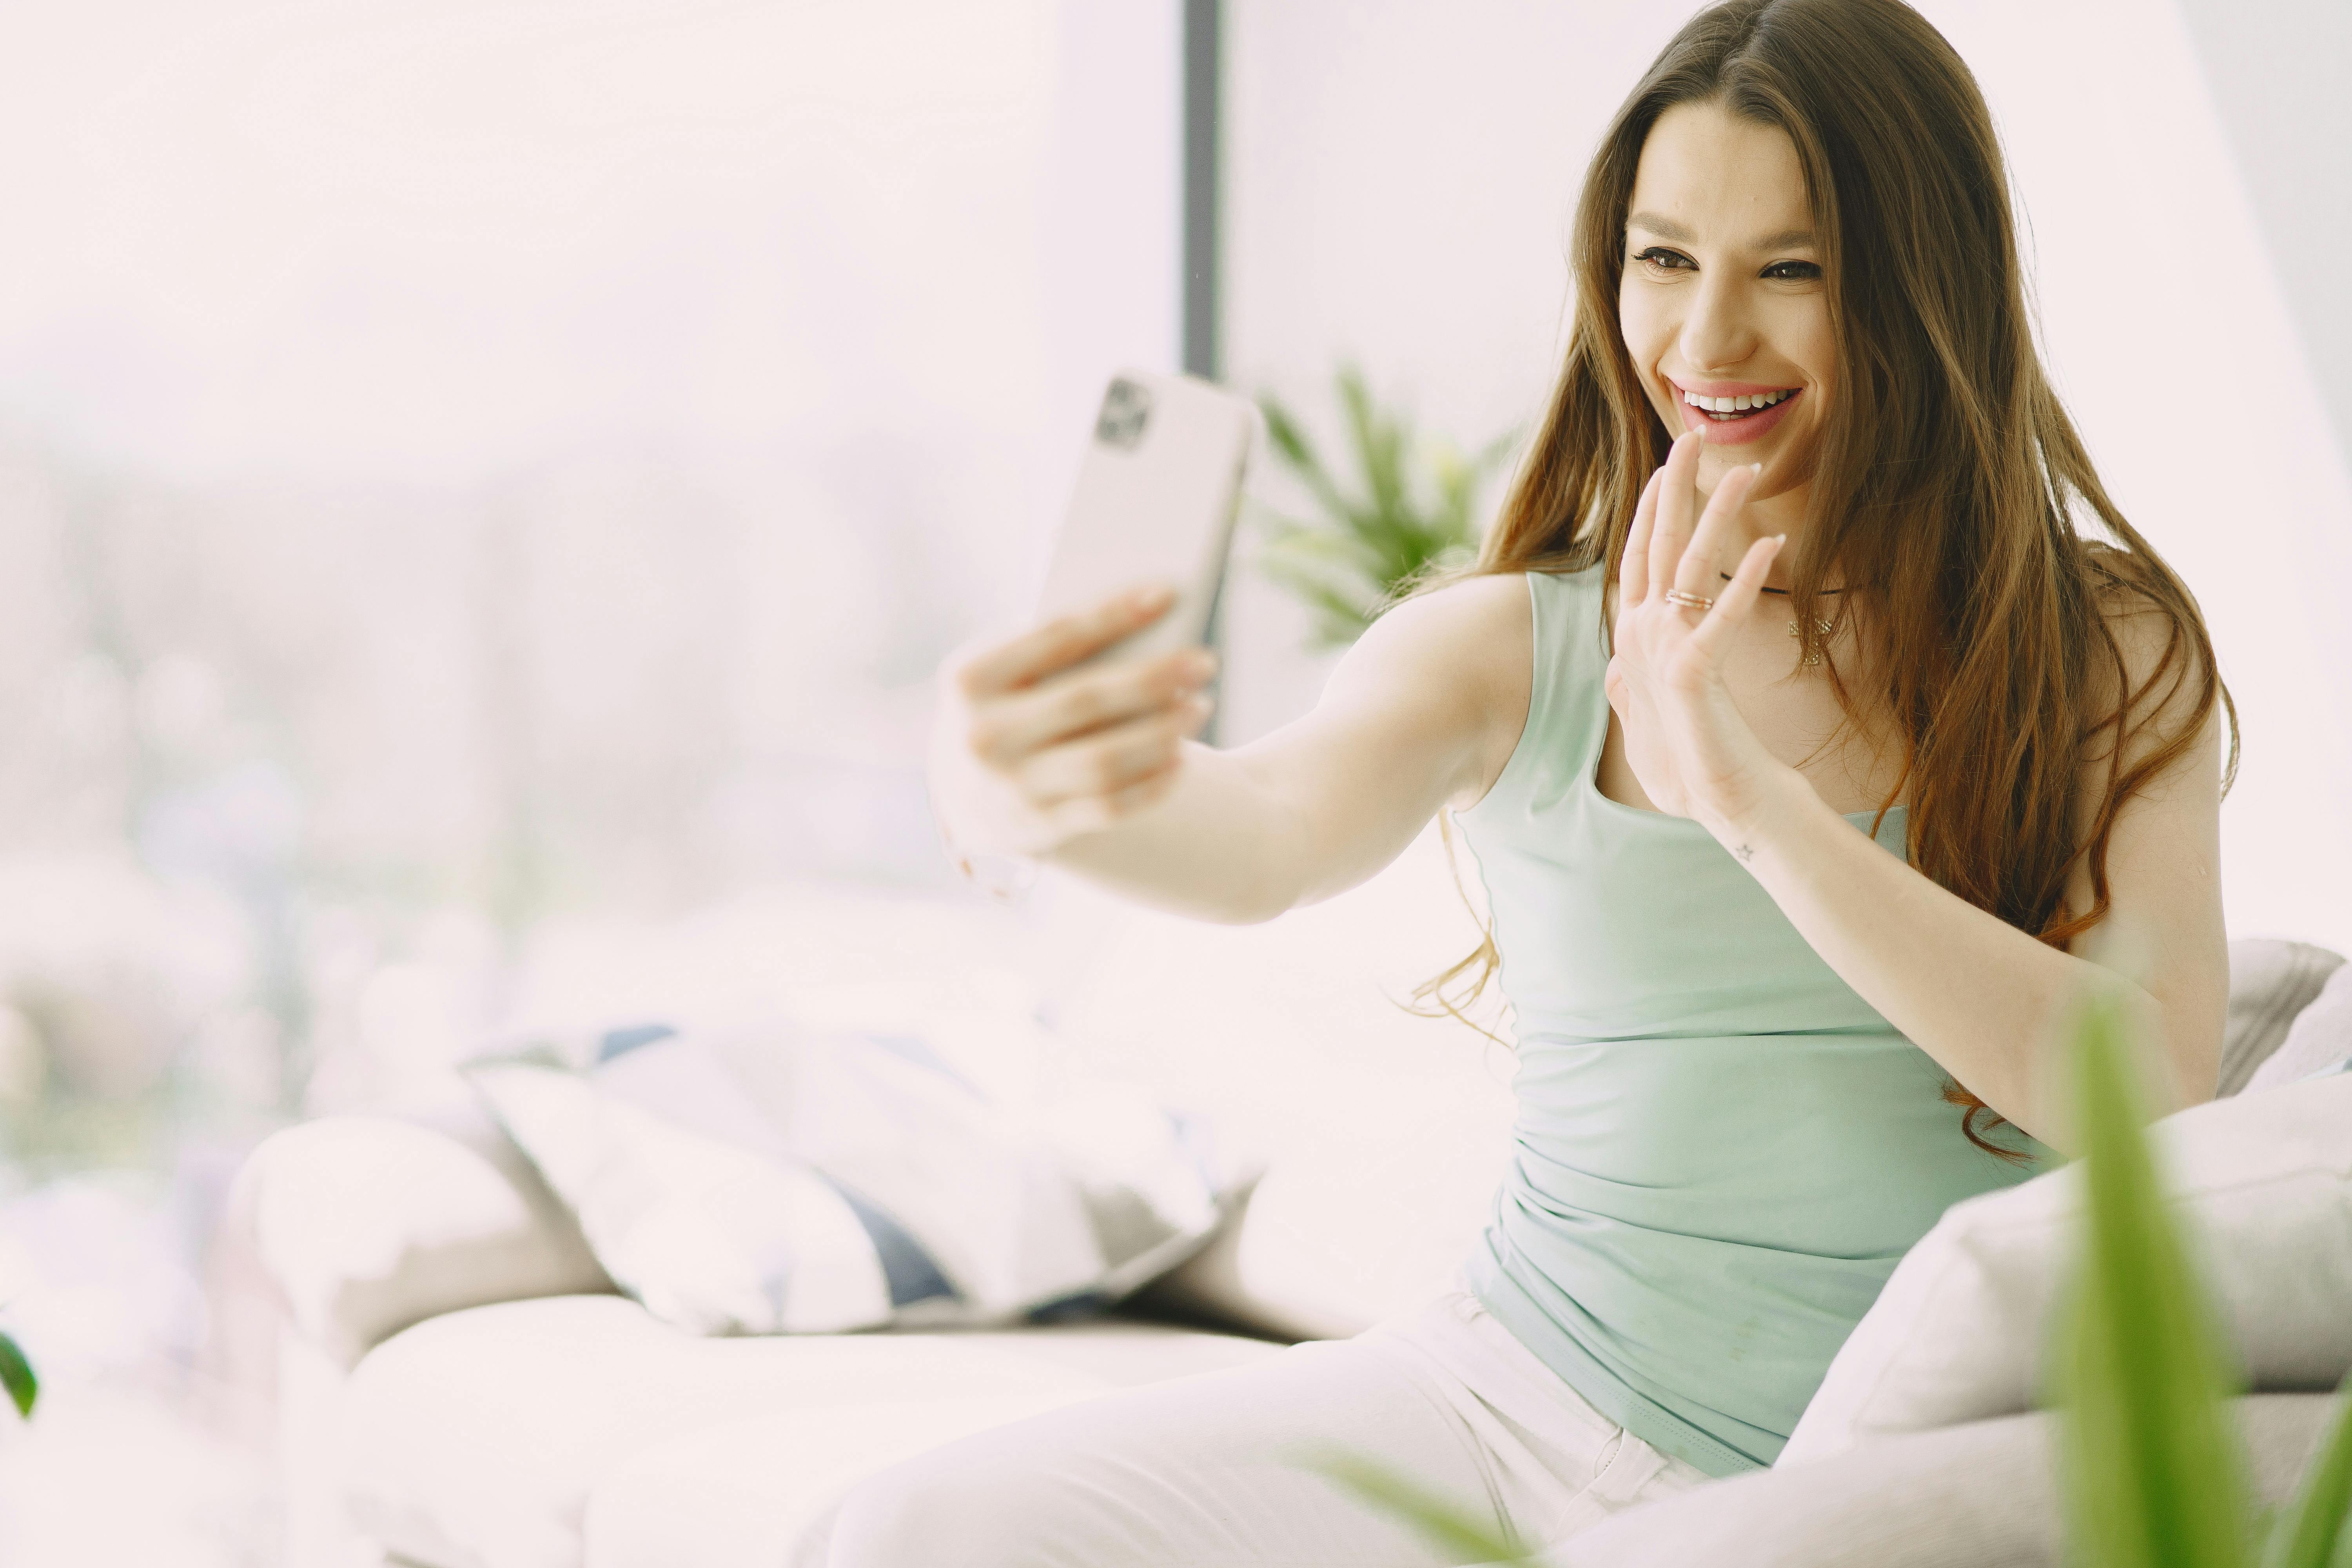 A cheerful woman on video call | Source: Pexels